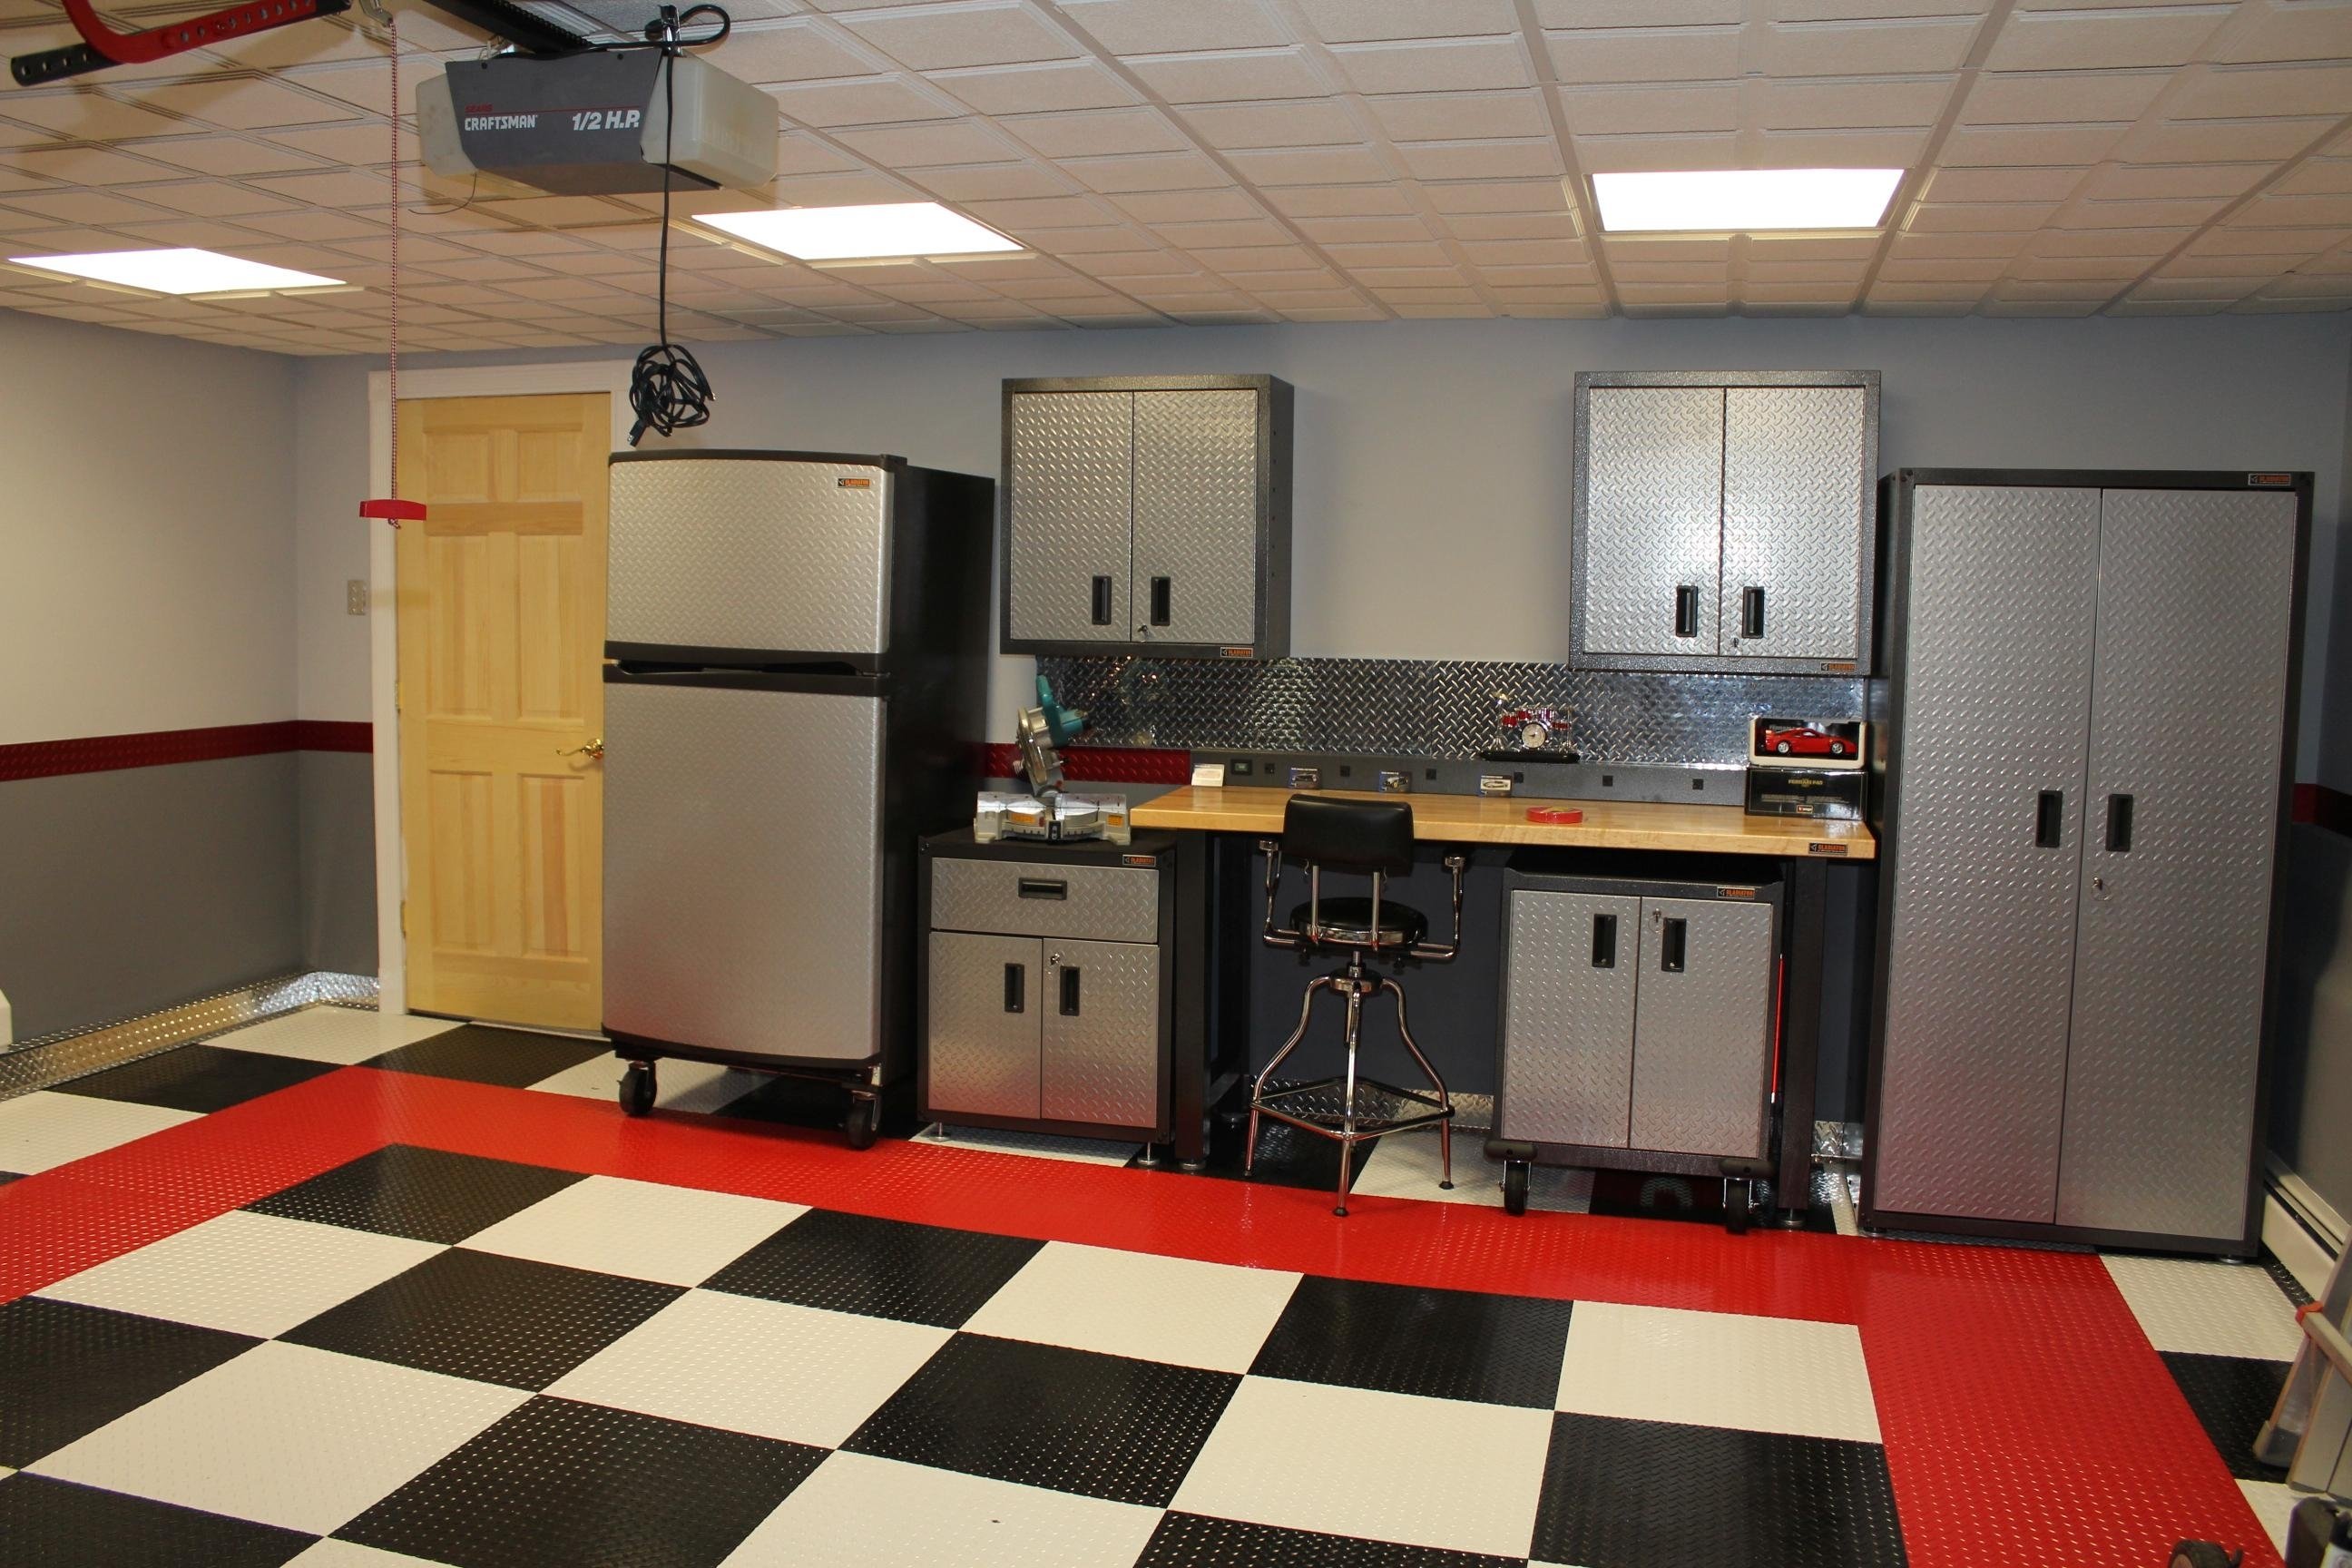 10 Most Recommended Garage Remodeling Ideas Man Cave garagemancaveideas mike from nj may 2012 garage remodel 2022